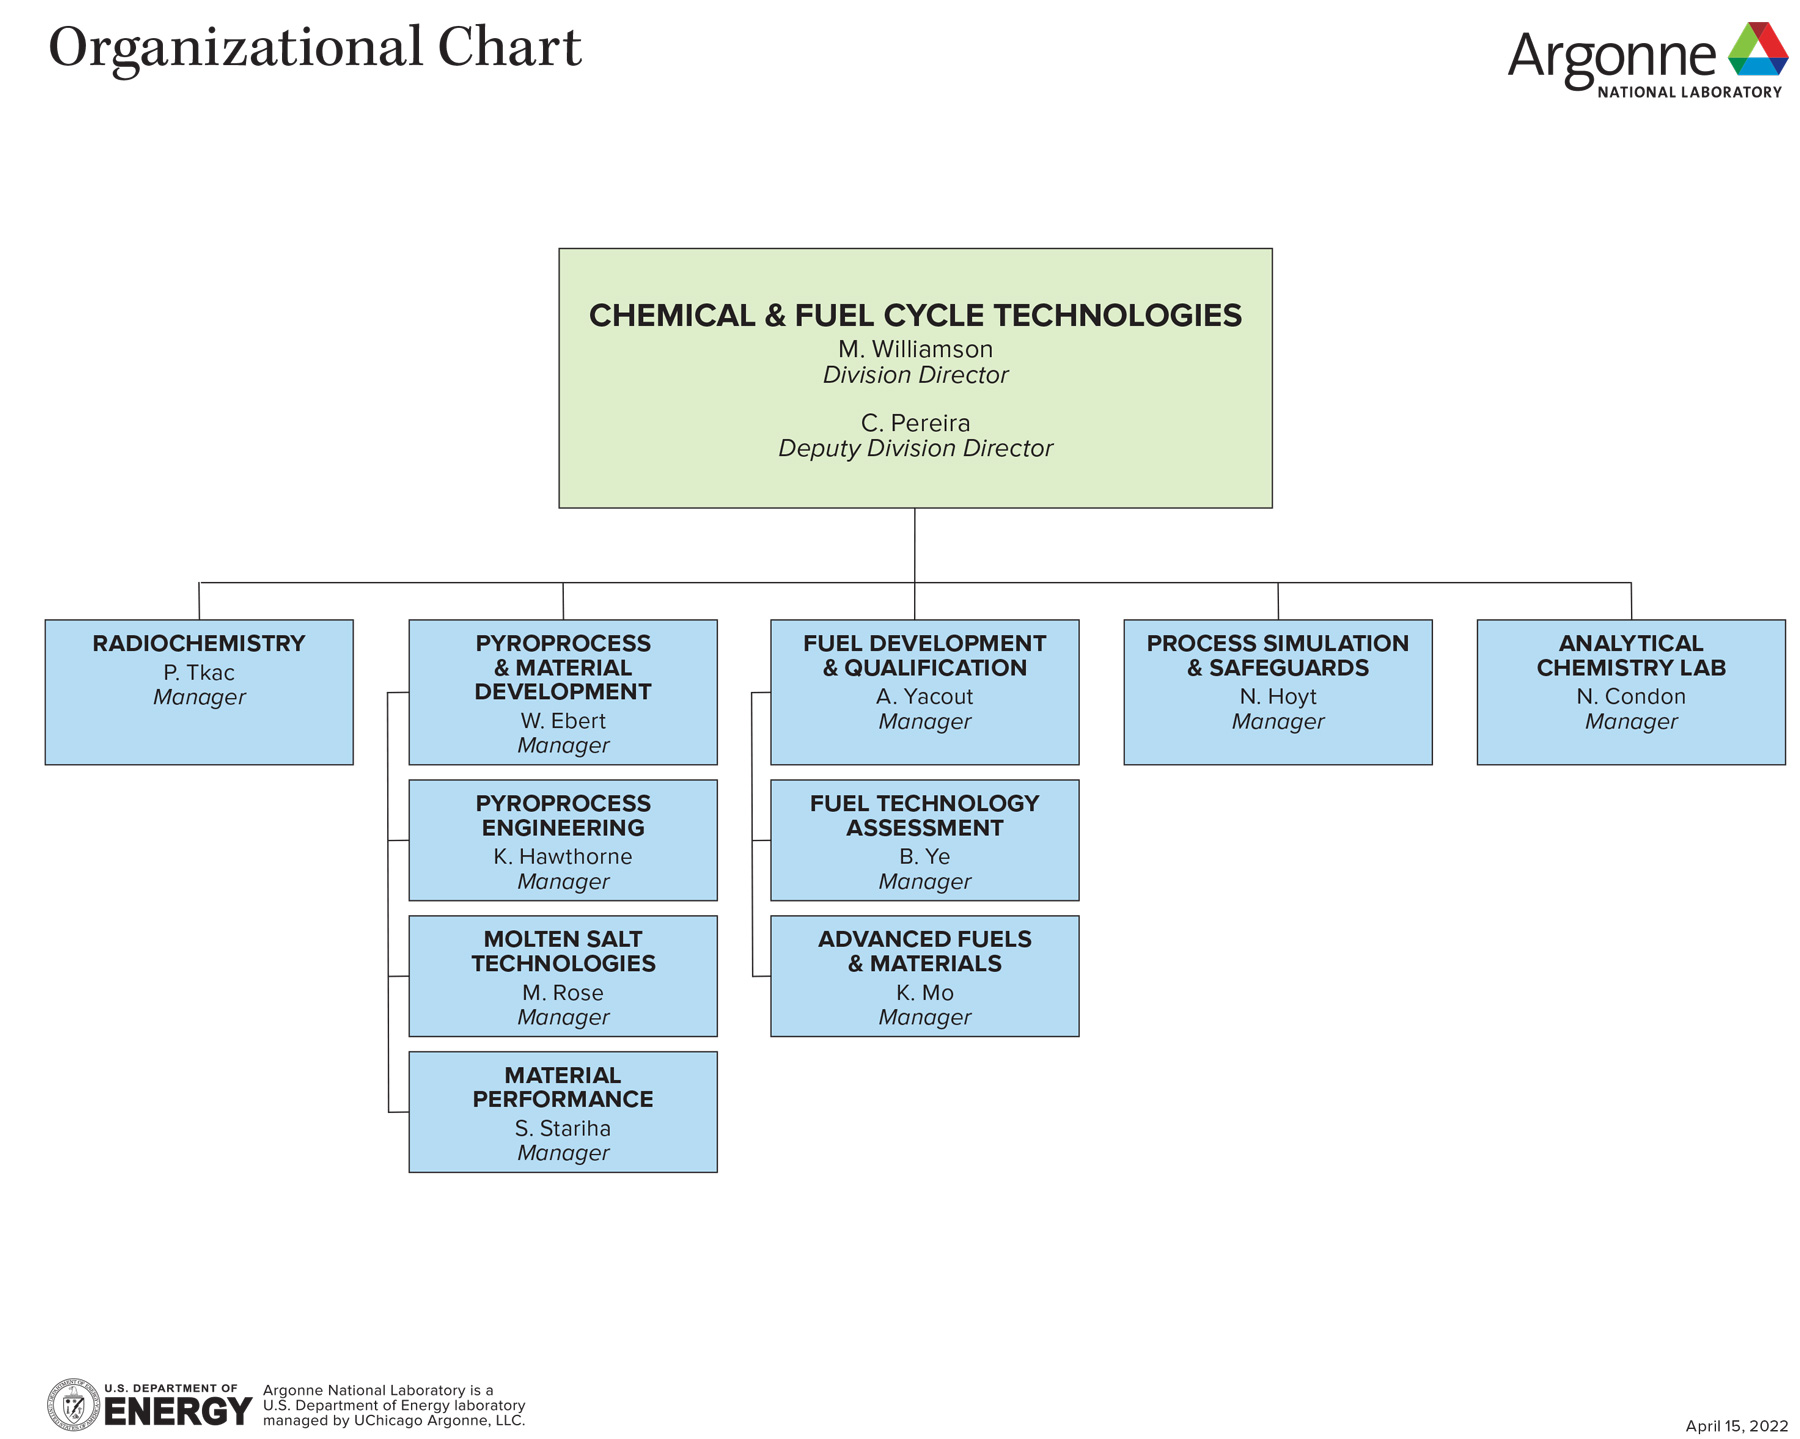 Organization chart of the Argonne Chemical & Fuel Cycle Technologies division